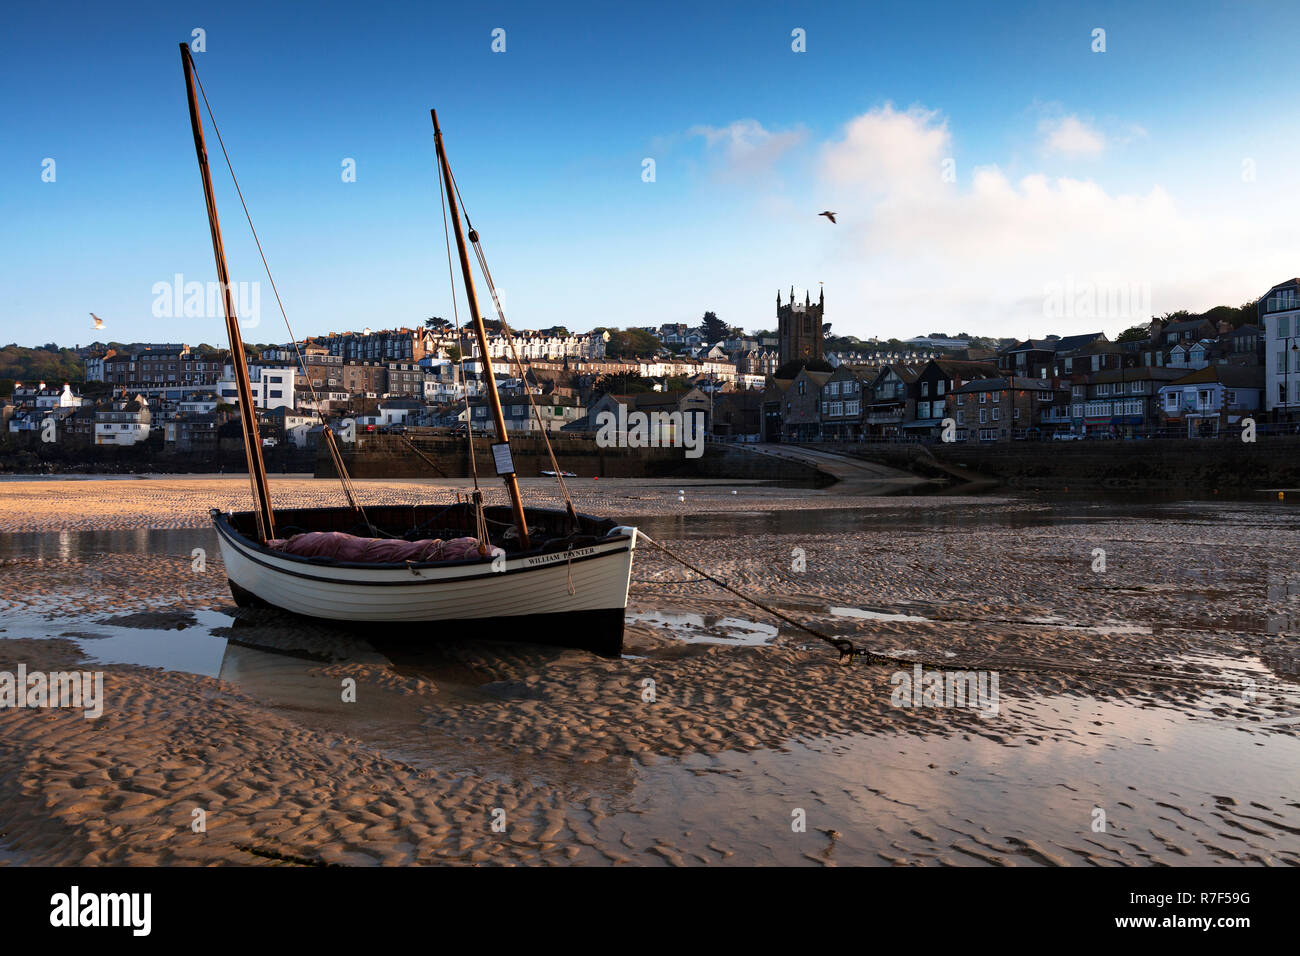 Boat in the harbor, low tide, St.Ives, Cornwall, England, UK Stock Photo